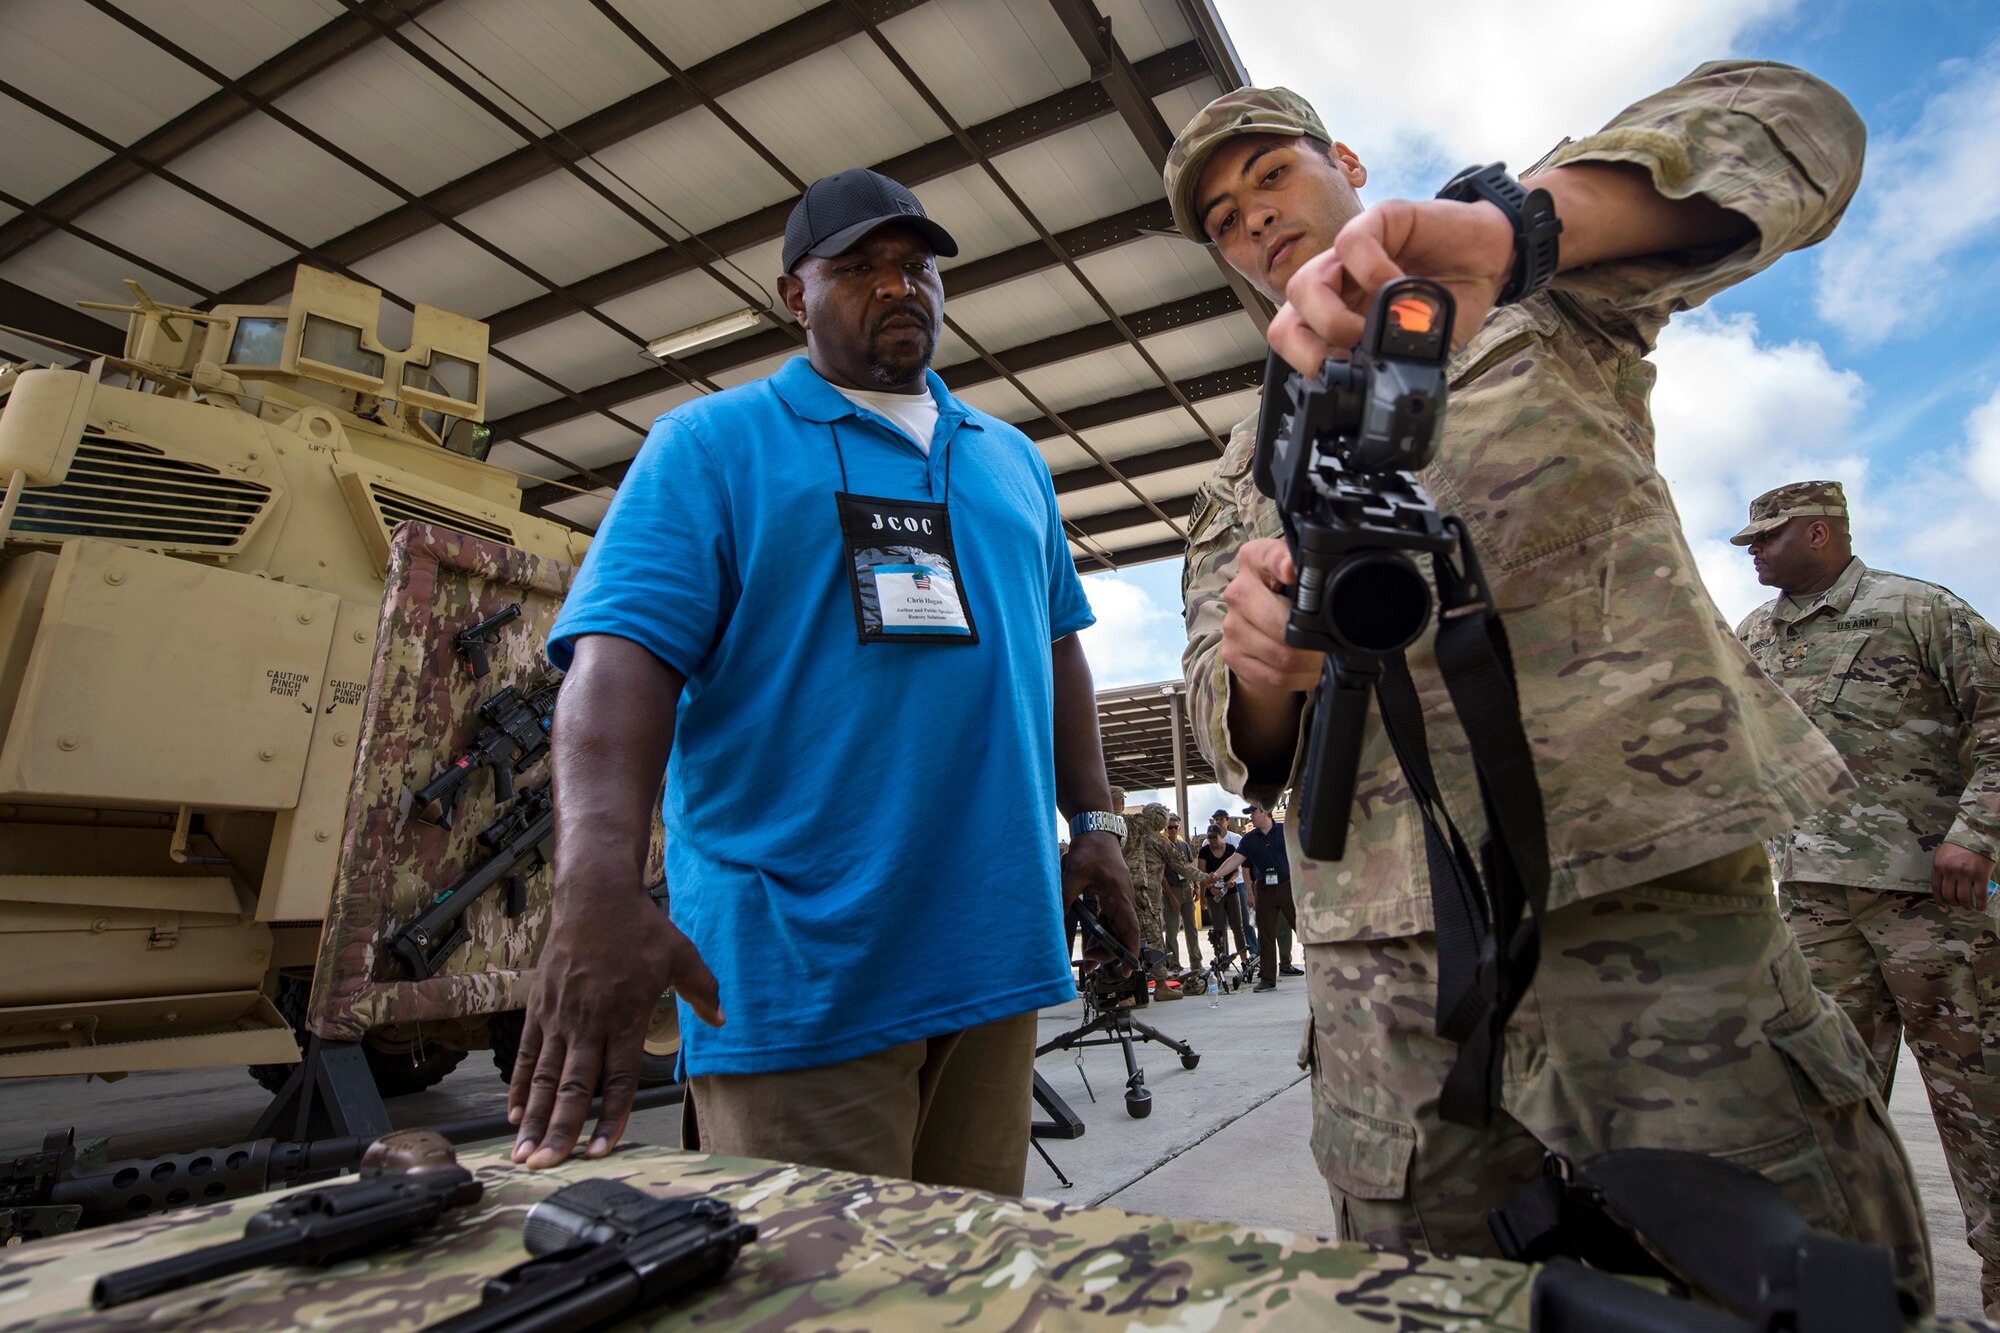 Staff Sgt. Kyle Rosenberg, 822d Base Defense Squadron fire team member, shows the components of an M4 Carbine to Chris Hogan, Joint Civilian Orientation Course 88 participant, June 13, 2018, at Moody Air Force Base, Ga. The mission of JCOC is to increase the public’s understanding of the military through engagements between the armed forces and course members. (U.S. Air Force photo by Airman 1st Class Eugene Oliver)